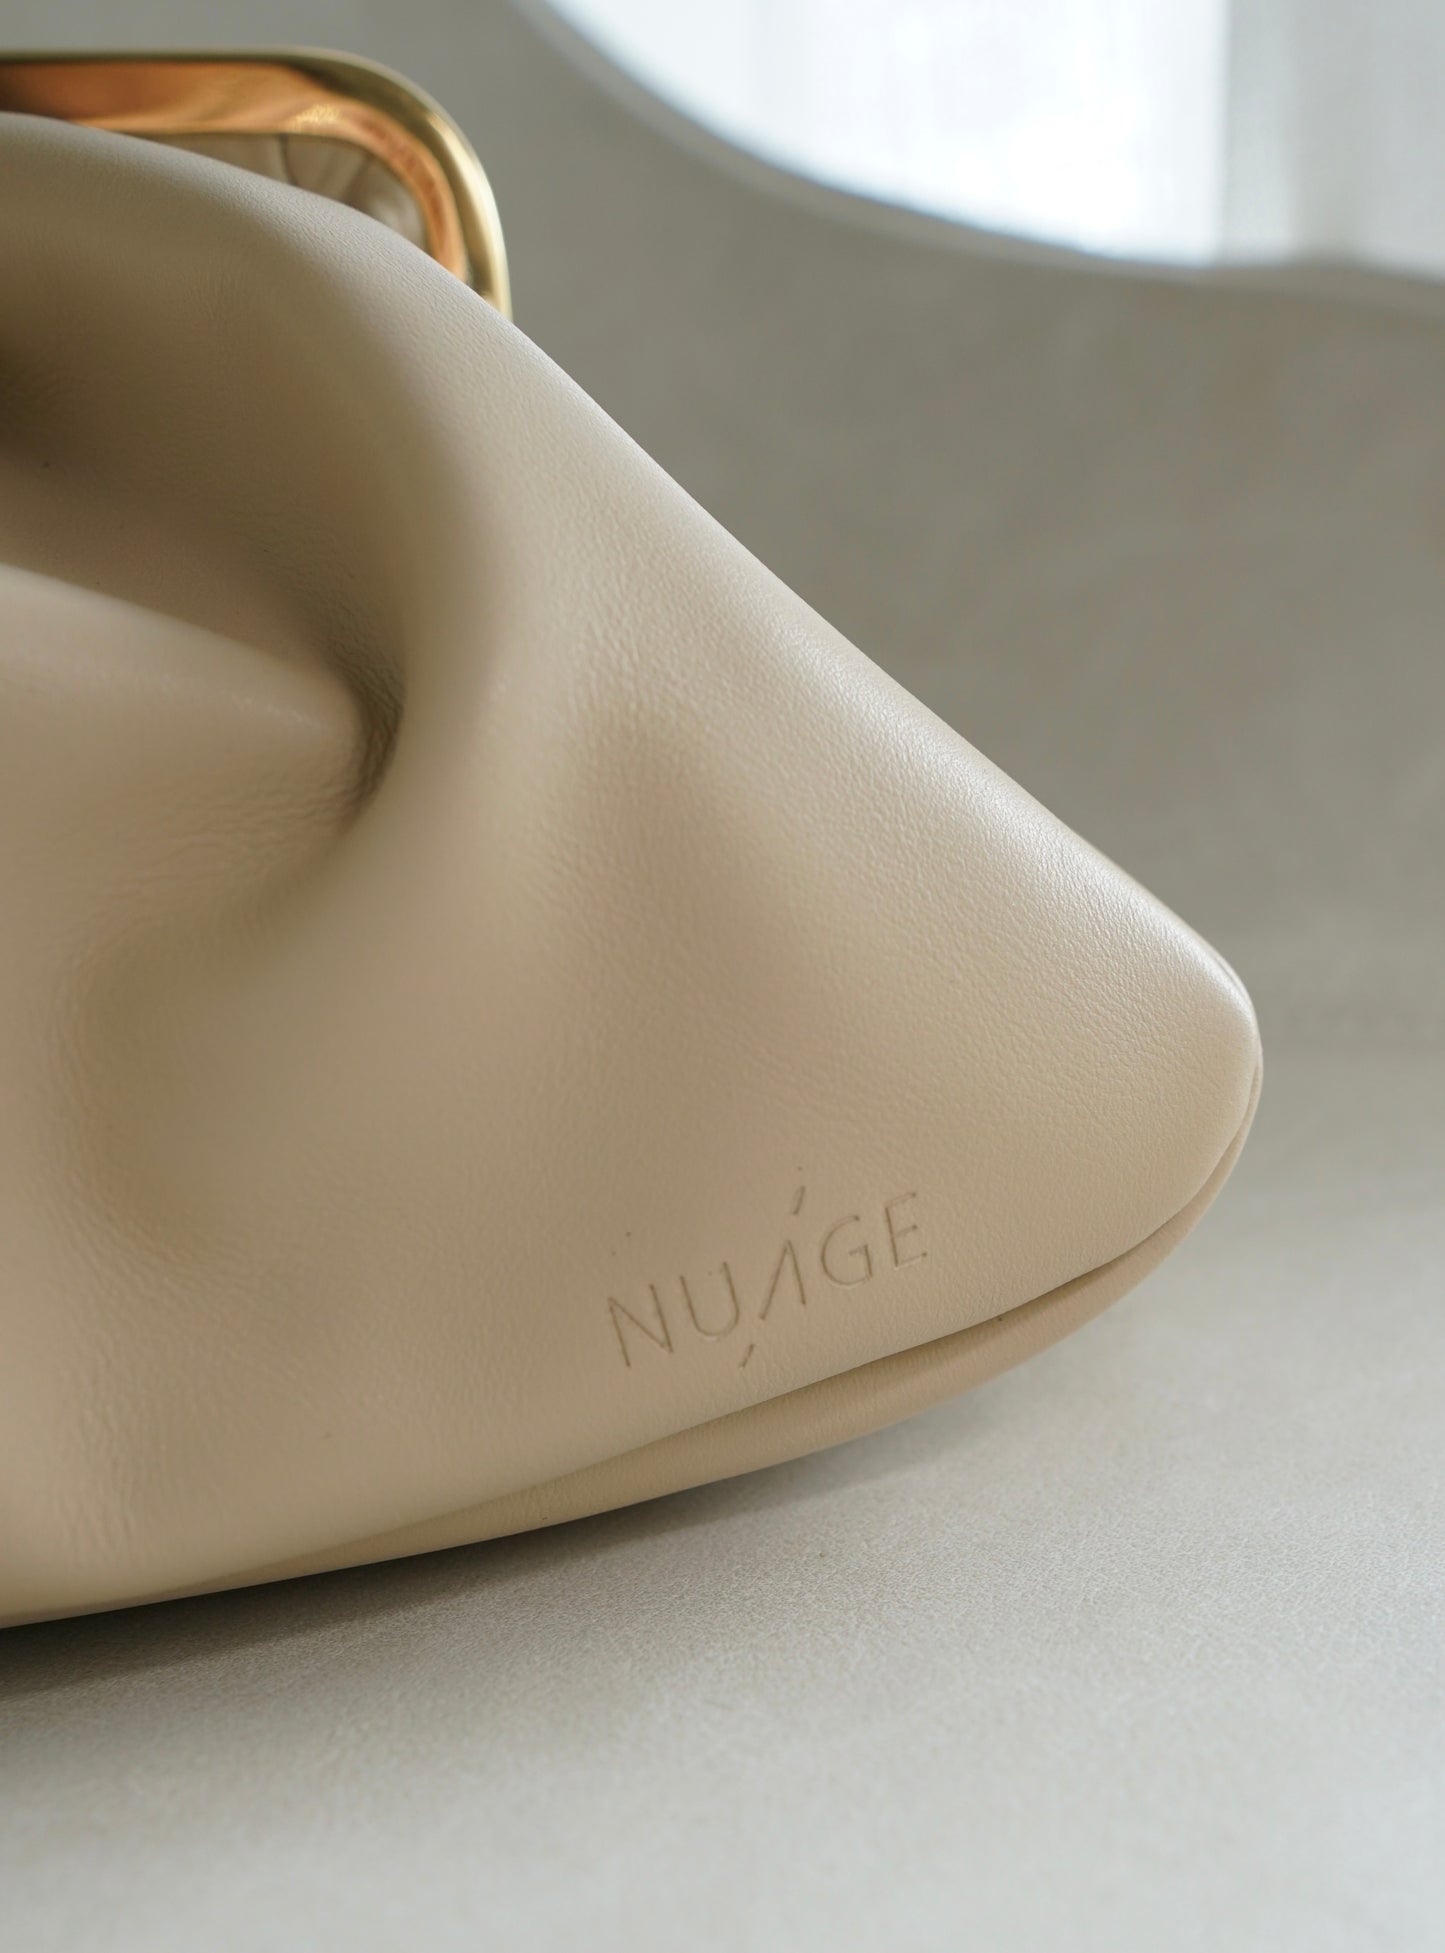 Nuage Classic Oyster